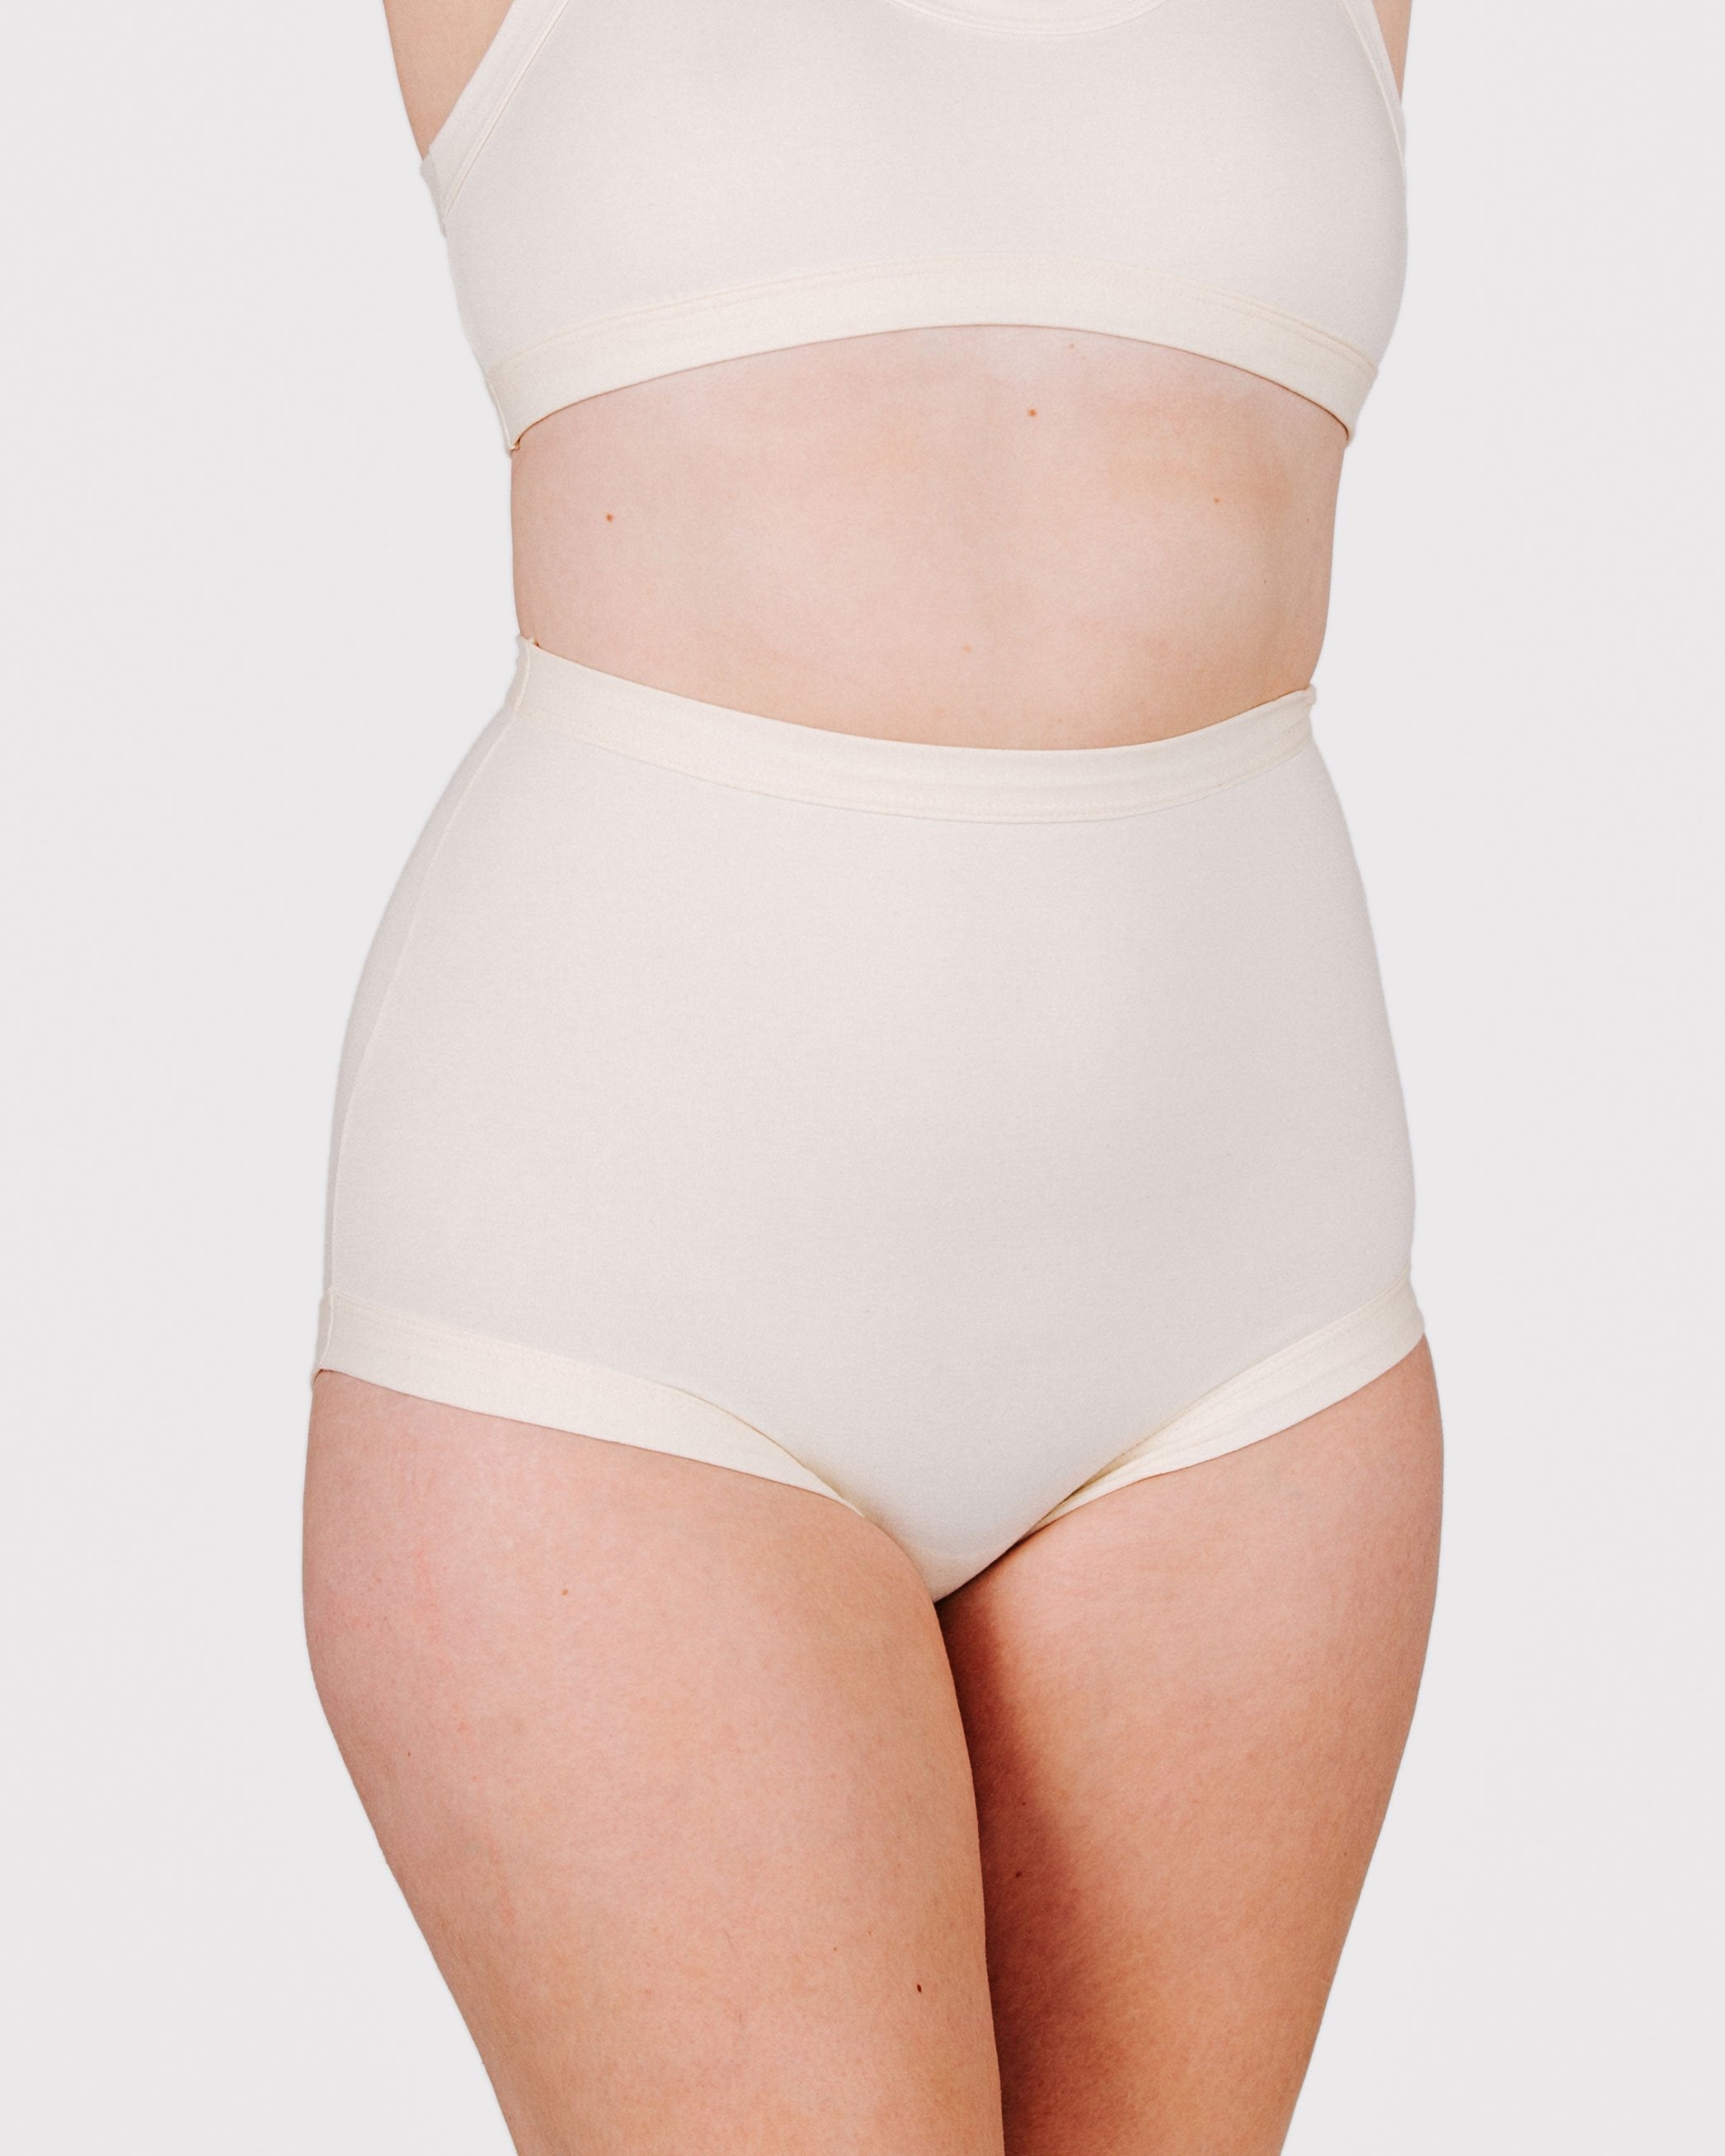 Fit photo from the front of Thunderpants organic cotton Sky Rise style underwear in off-white on a model.